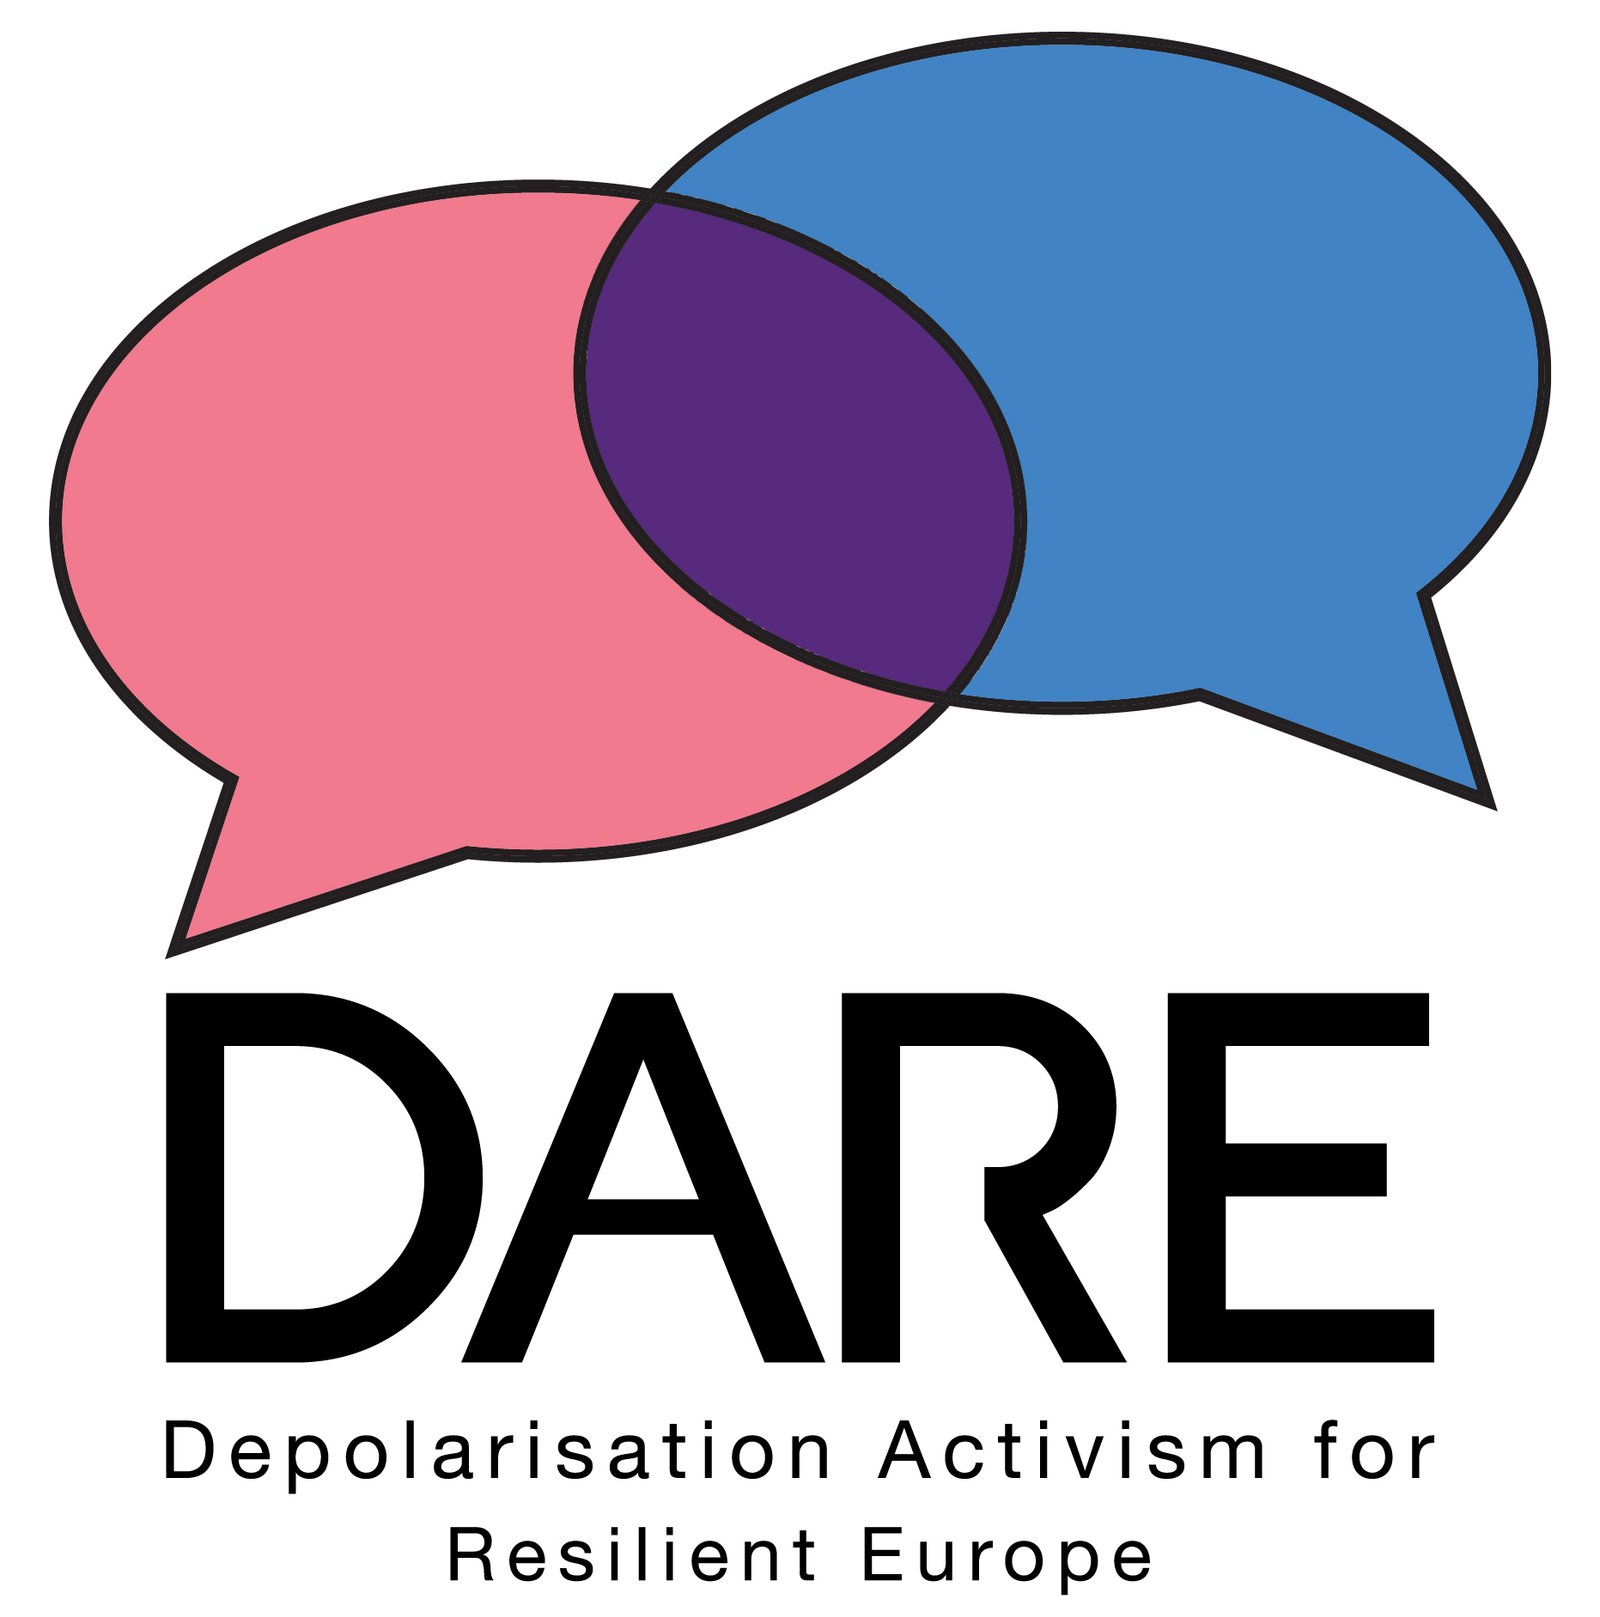 About the Project – DARE